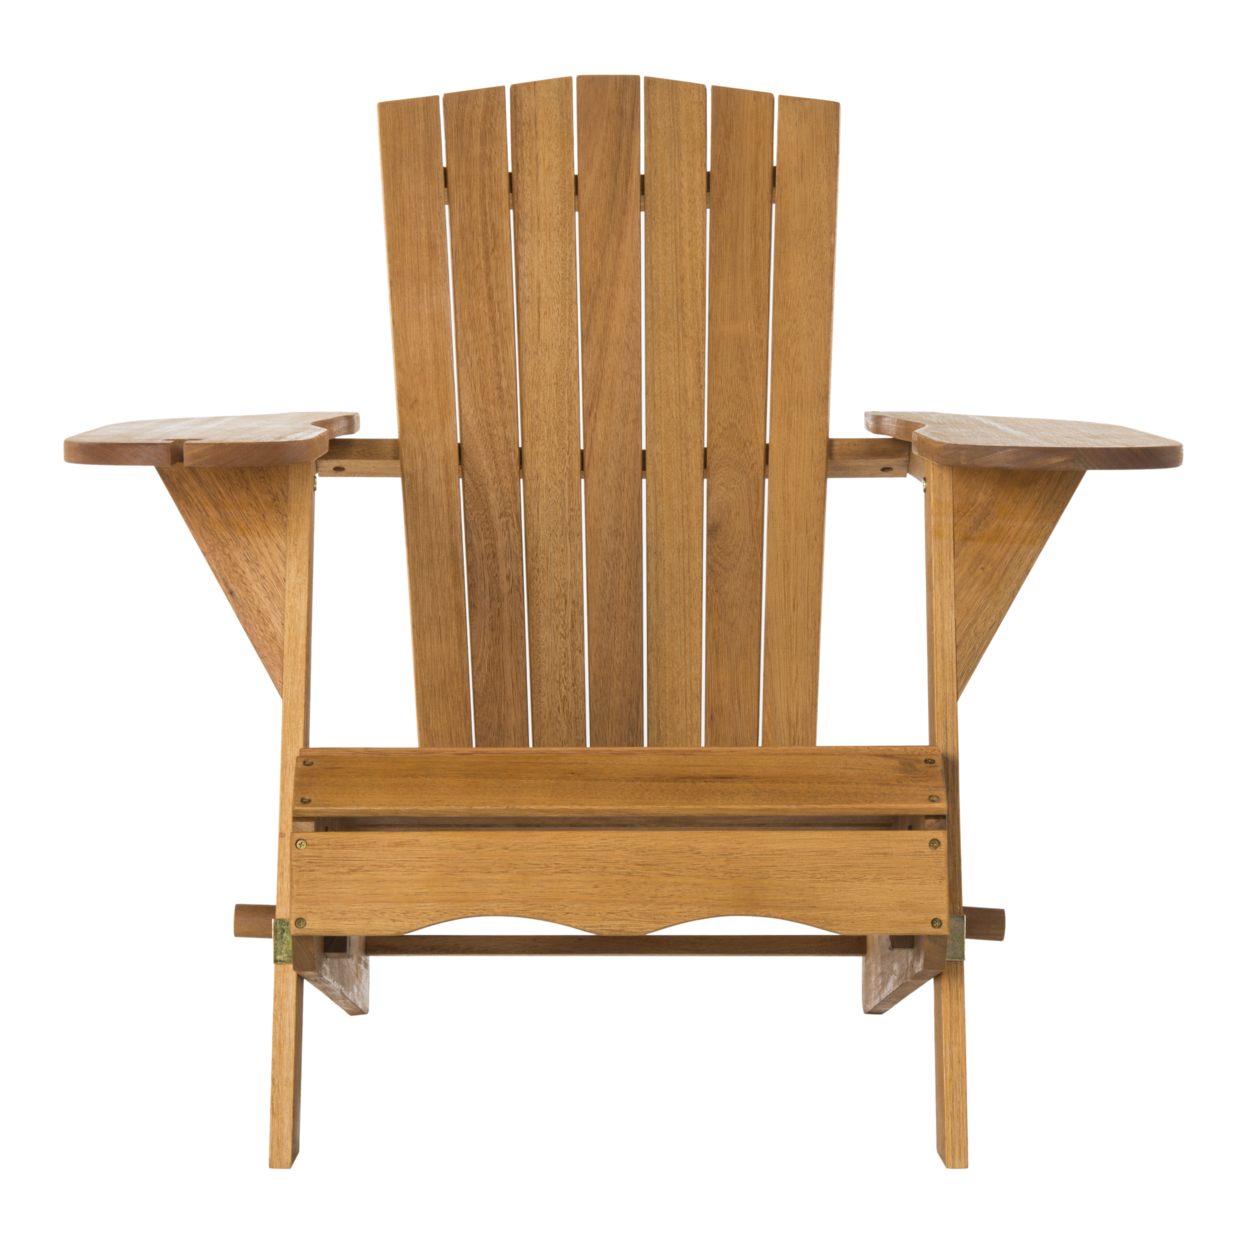 SAFAVIEH Outdoor Collection Breetel Set Of 2 Adirondack Chairs Natural